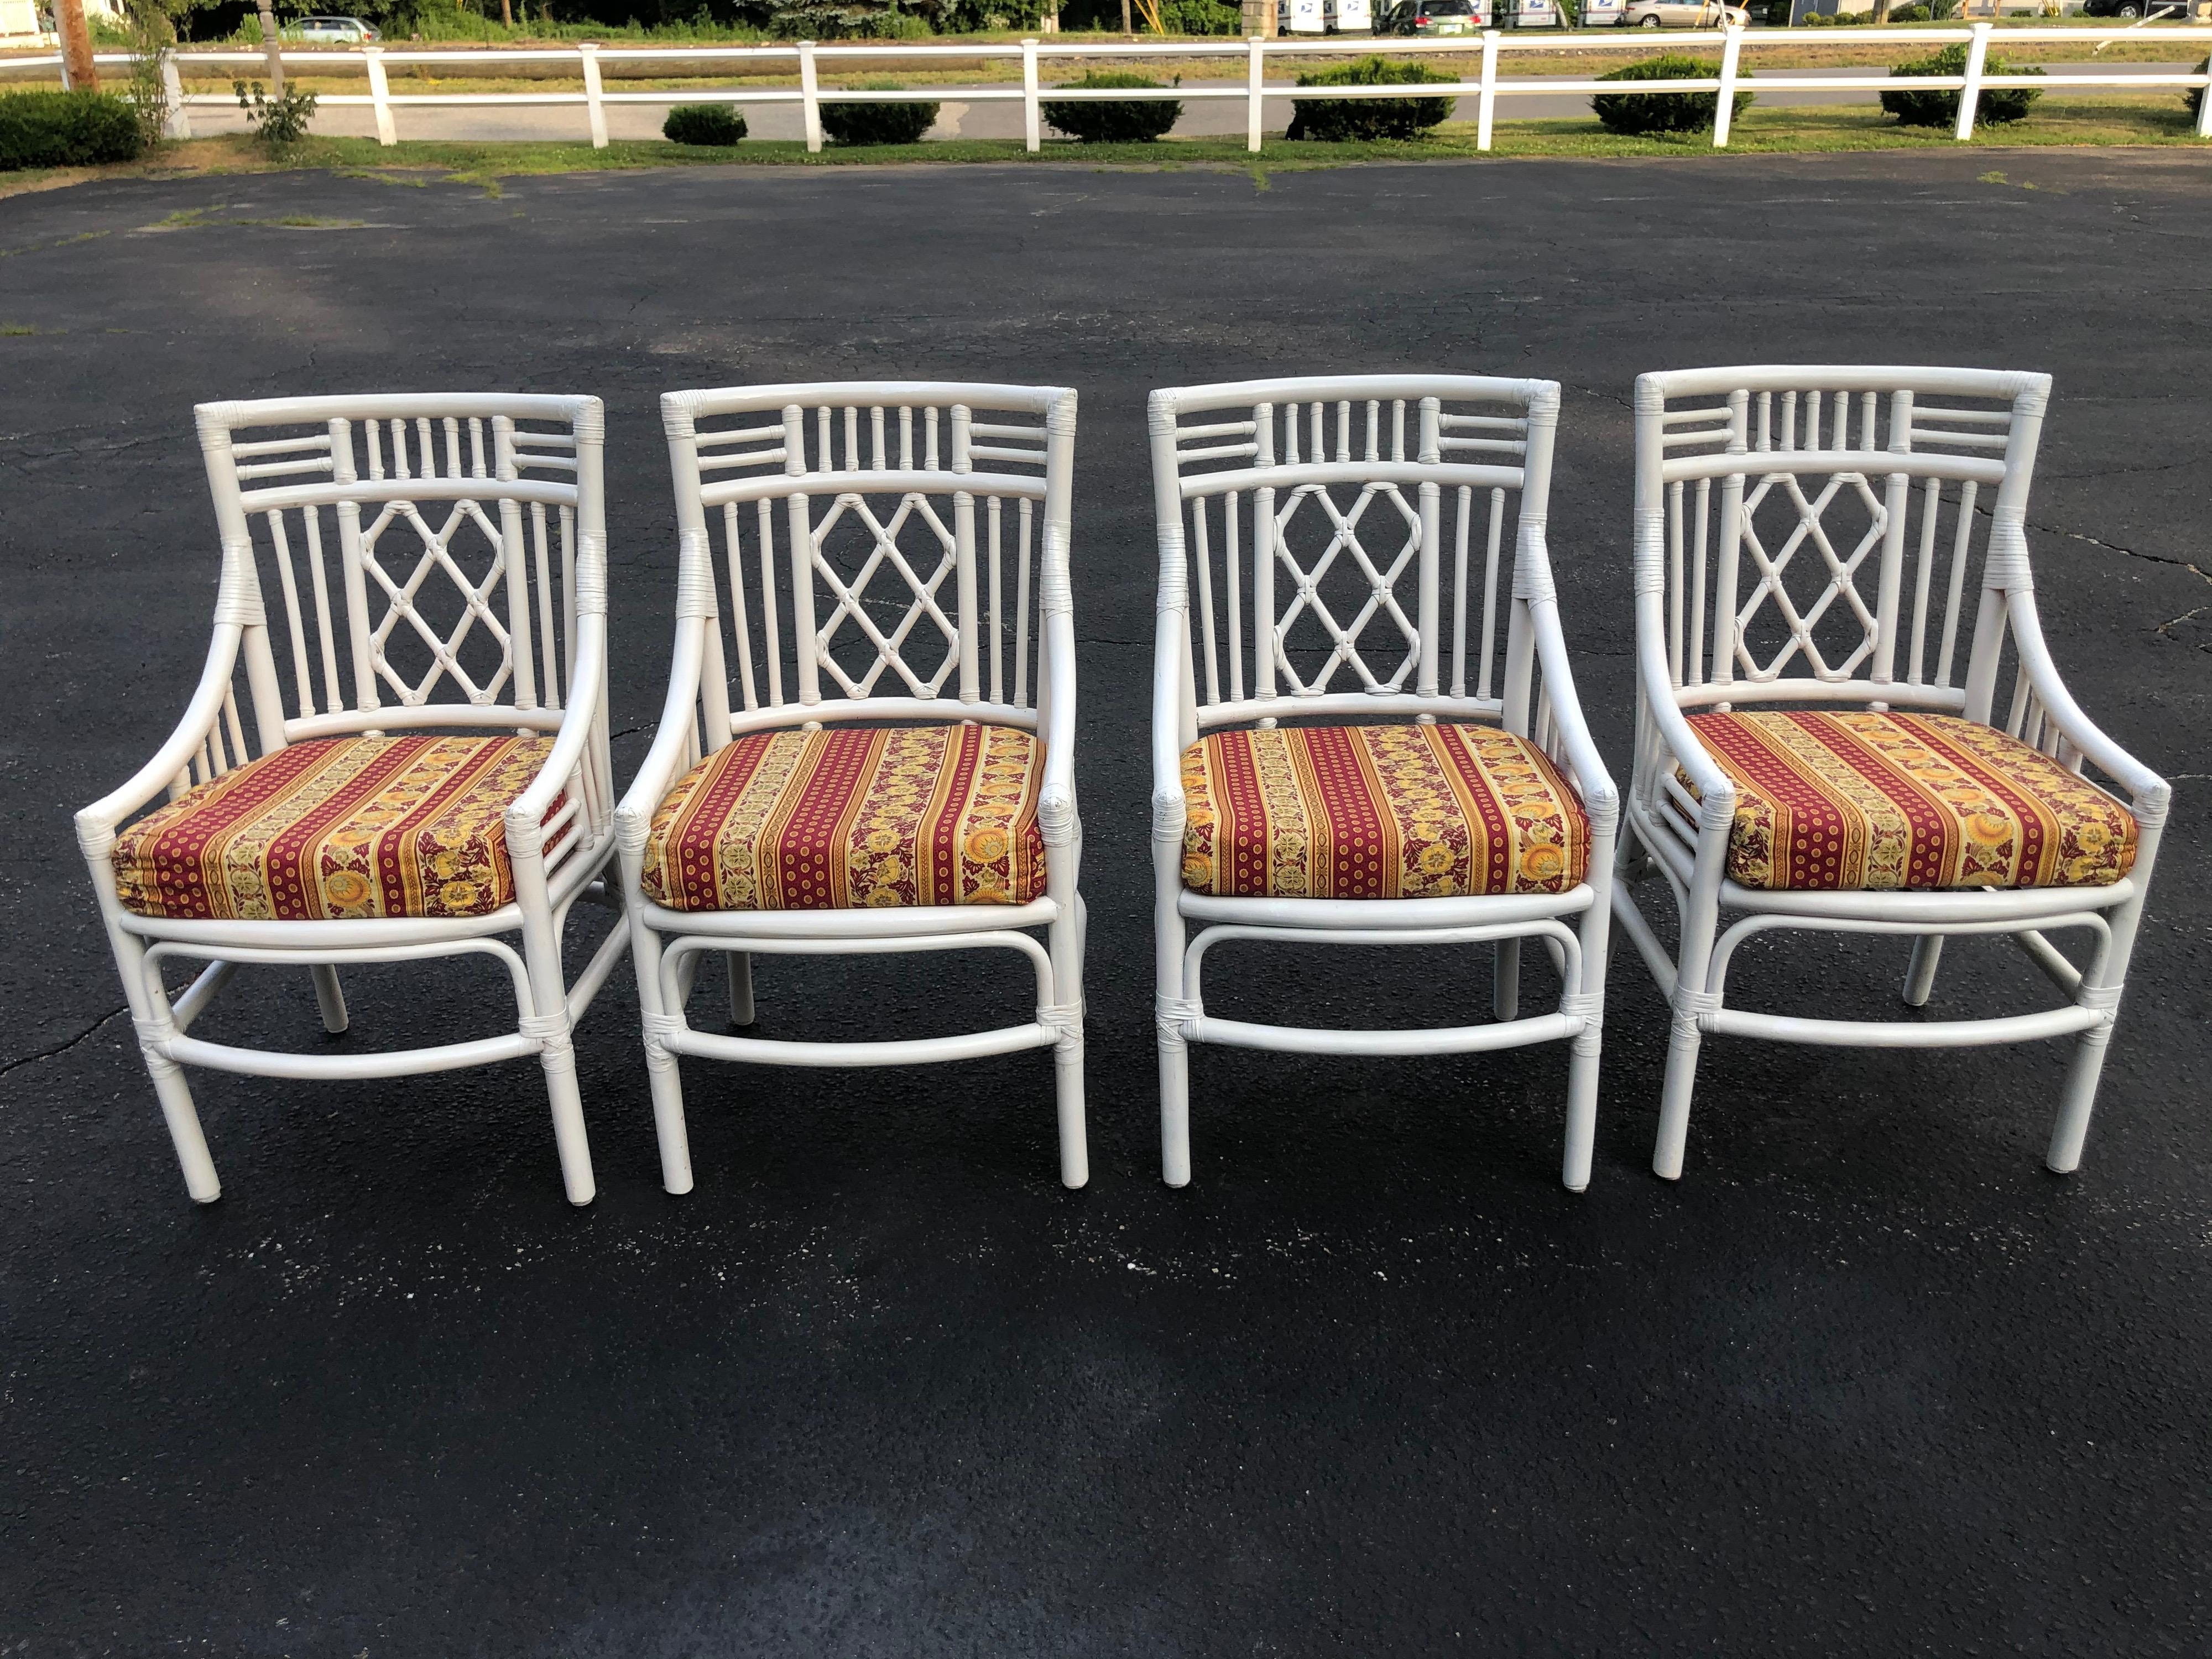 Set of four Chinese Chippendale rattan chairs. Fabulous fretwork design. Hand upholstered seat cushions with zippers in French Pierre Deux high end fabric. Seat depth 18.